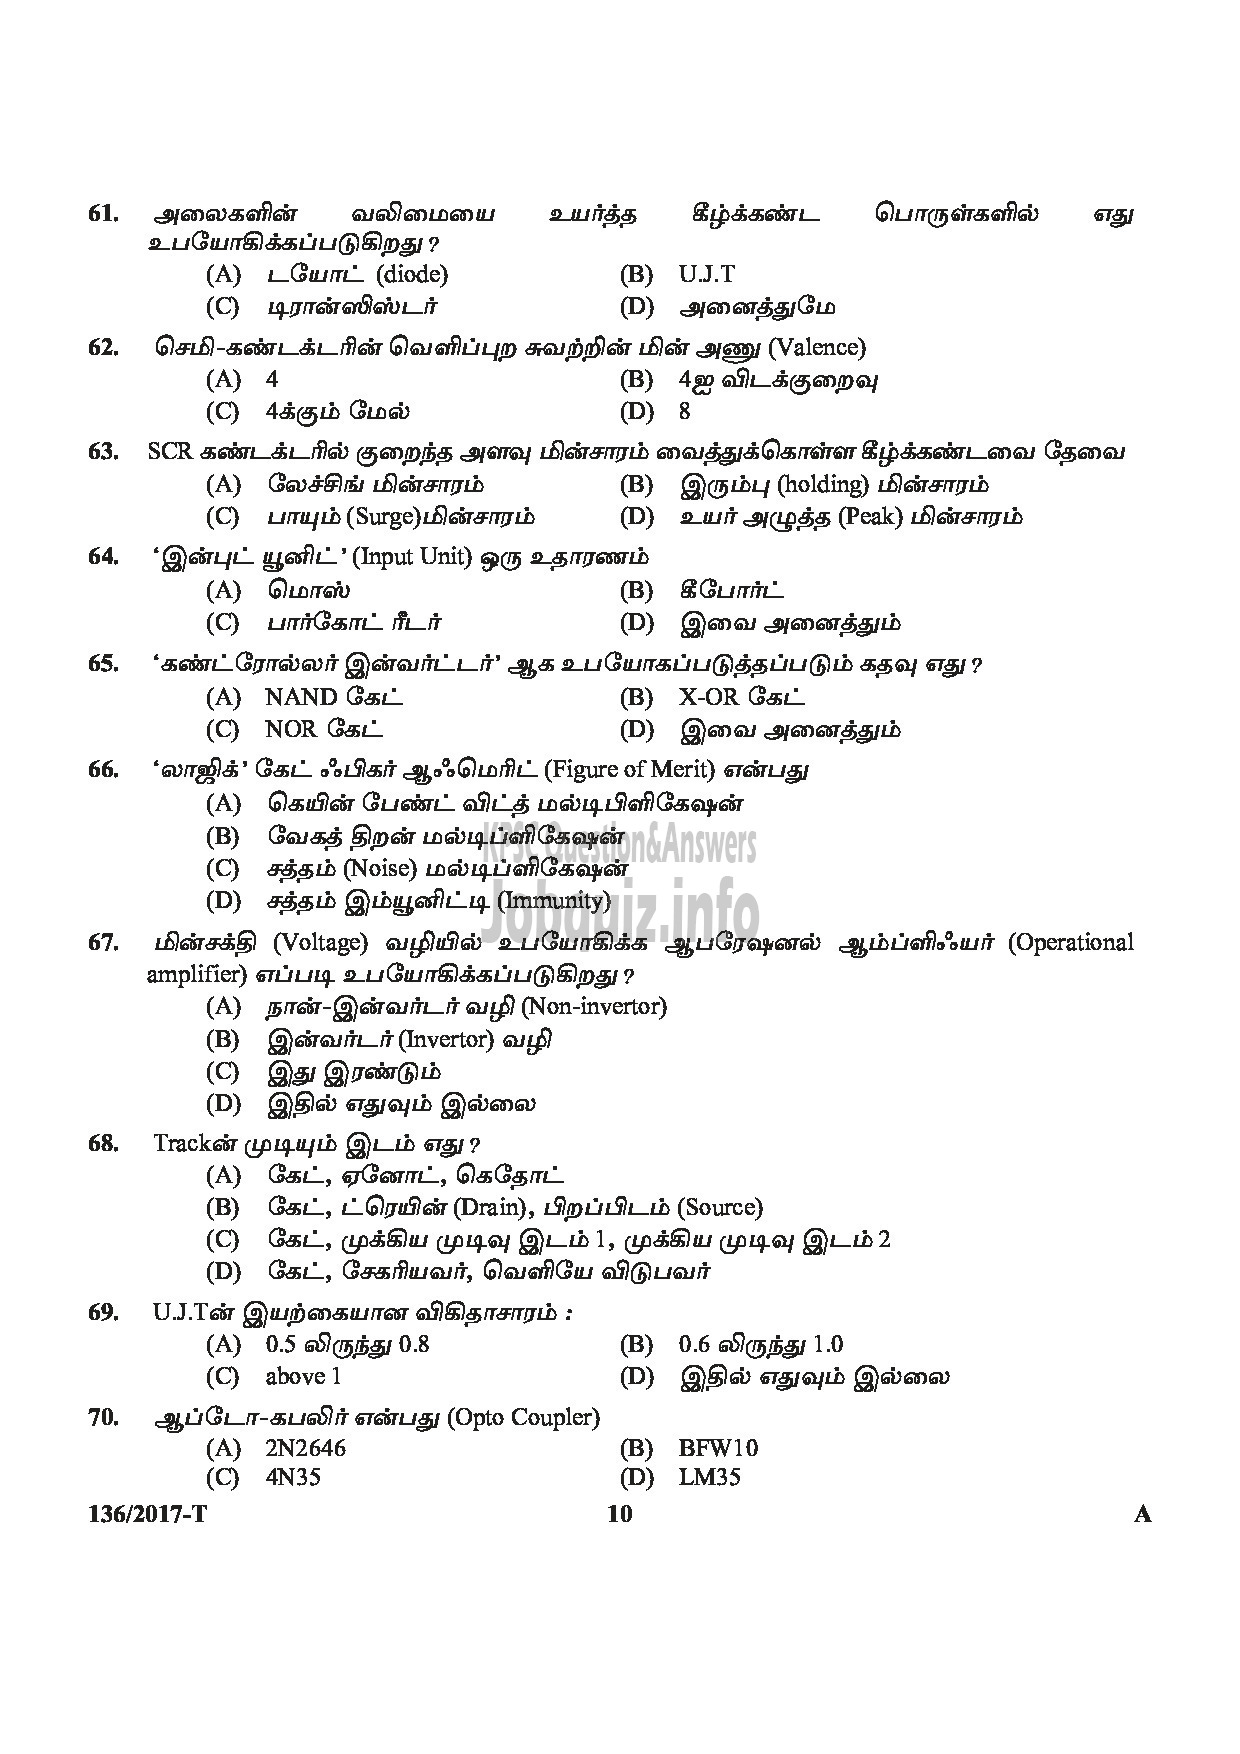 Kerala PSC Question Paper - METER READER/SPOT BILLER SPECIAL RECRUITMENT FROM AMONG ST ONLY MEDIUM OF QUESTION TAMIL-10